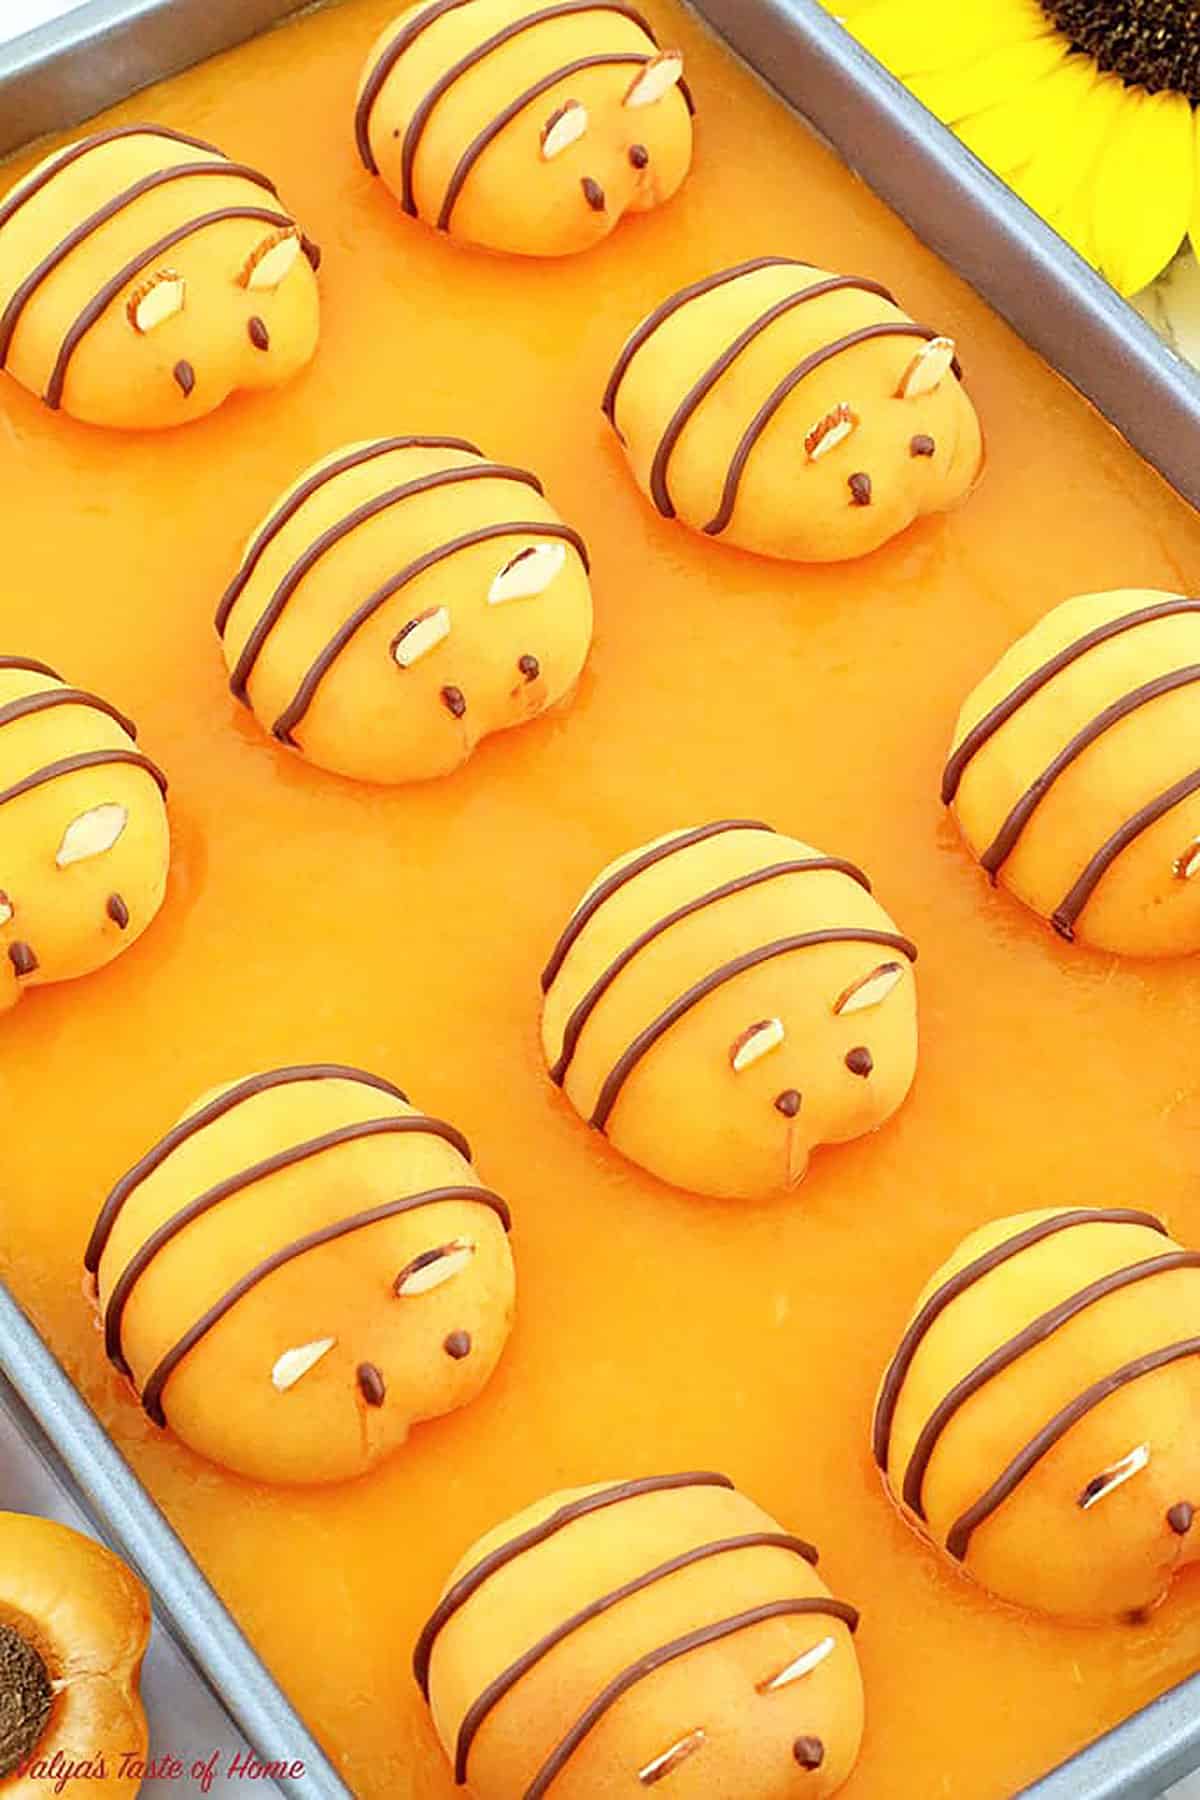 This adorable beehive-themed cake a lot of flavors, and every bite just melts in your mouth! With a fresh flavor and incredible design, I’m sure you’re going to love it.